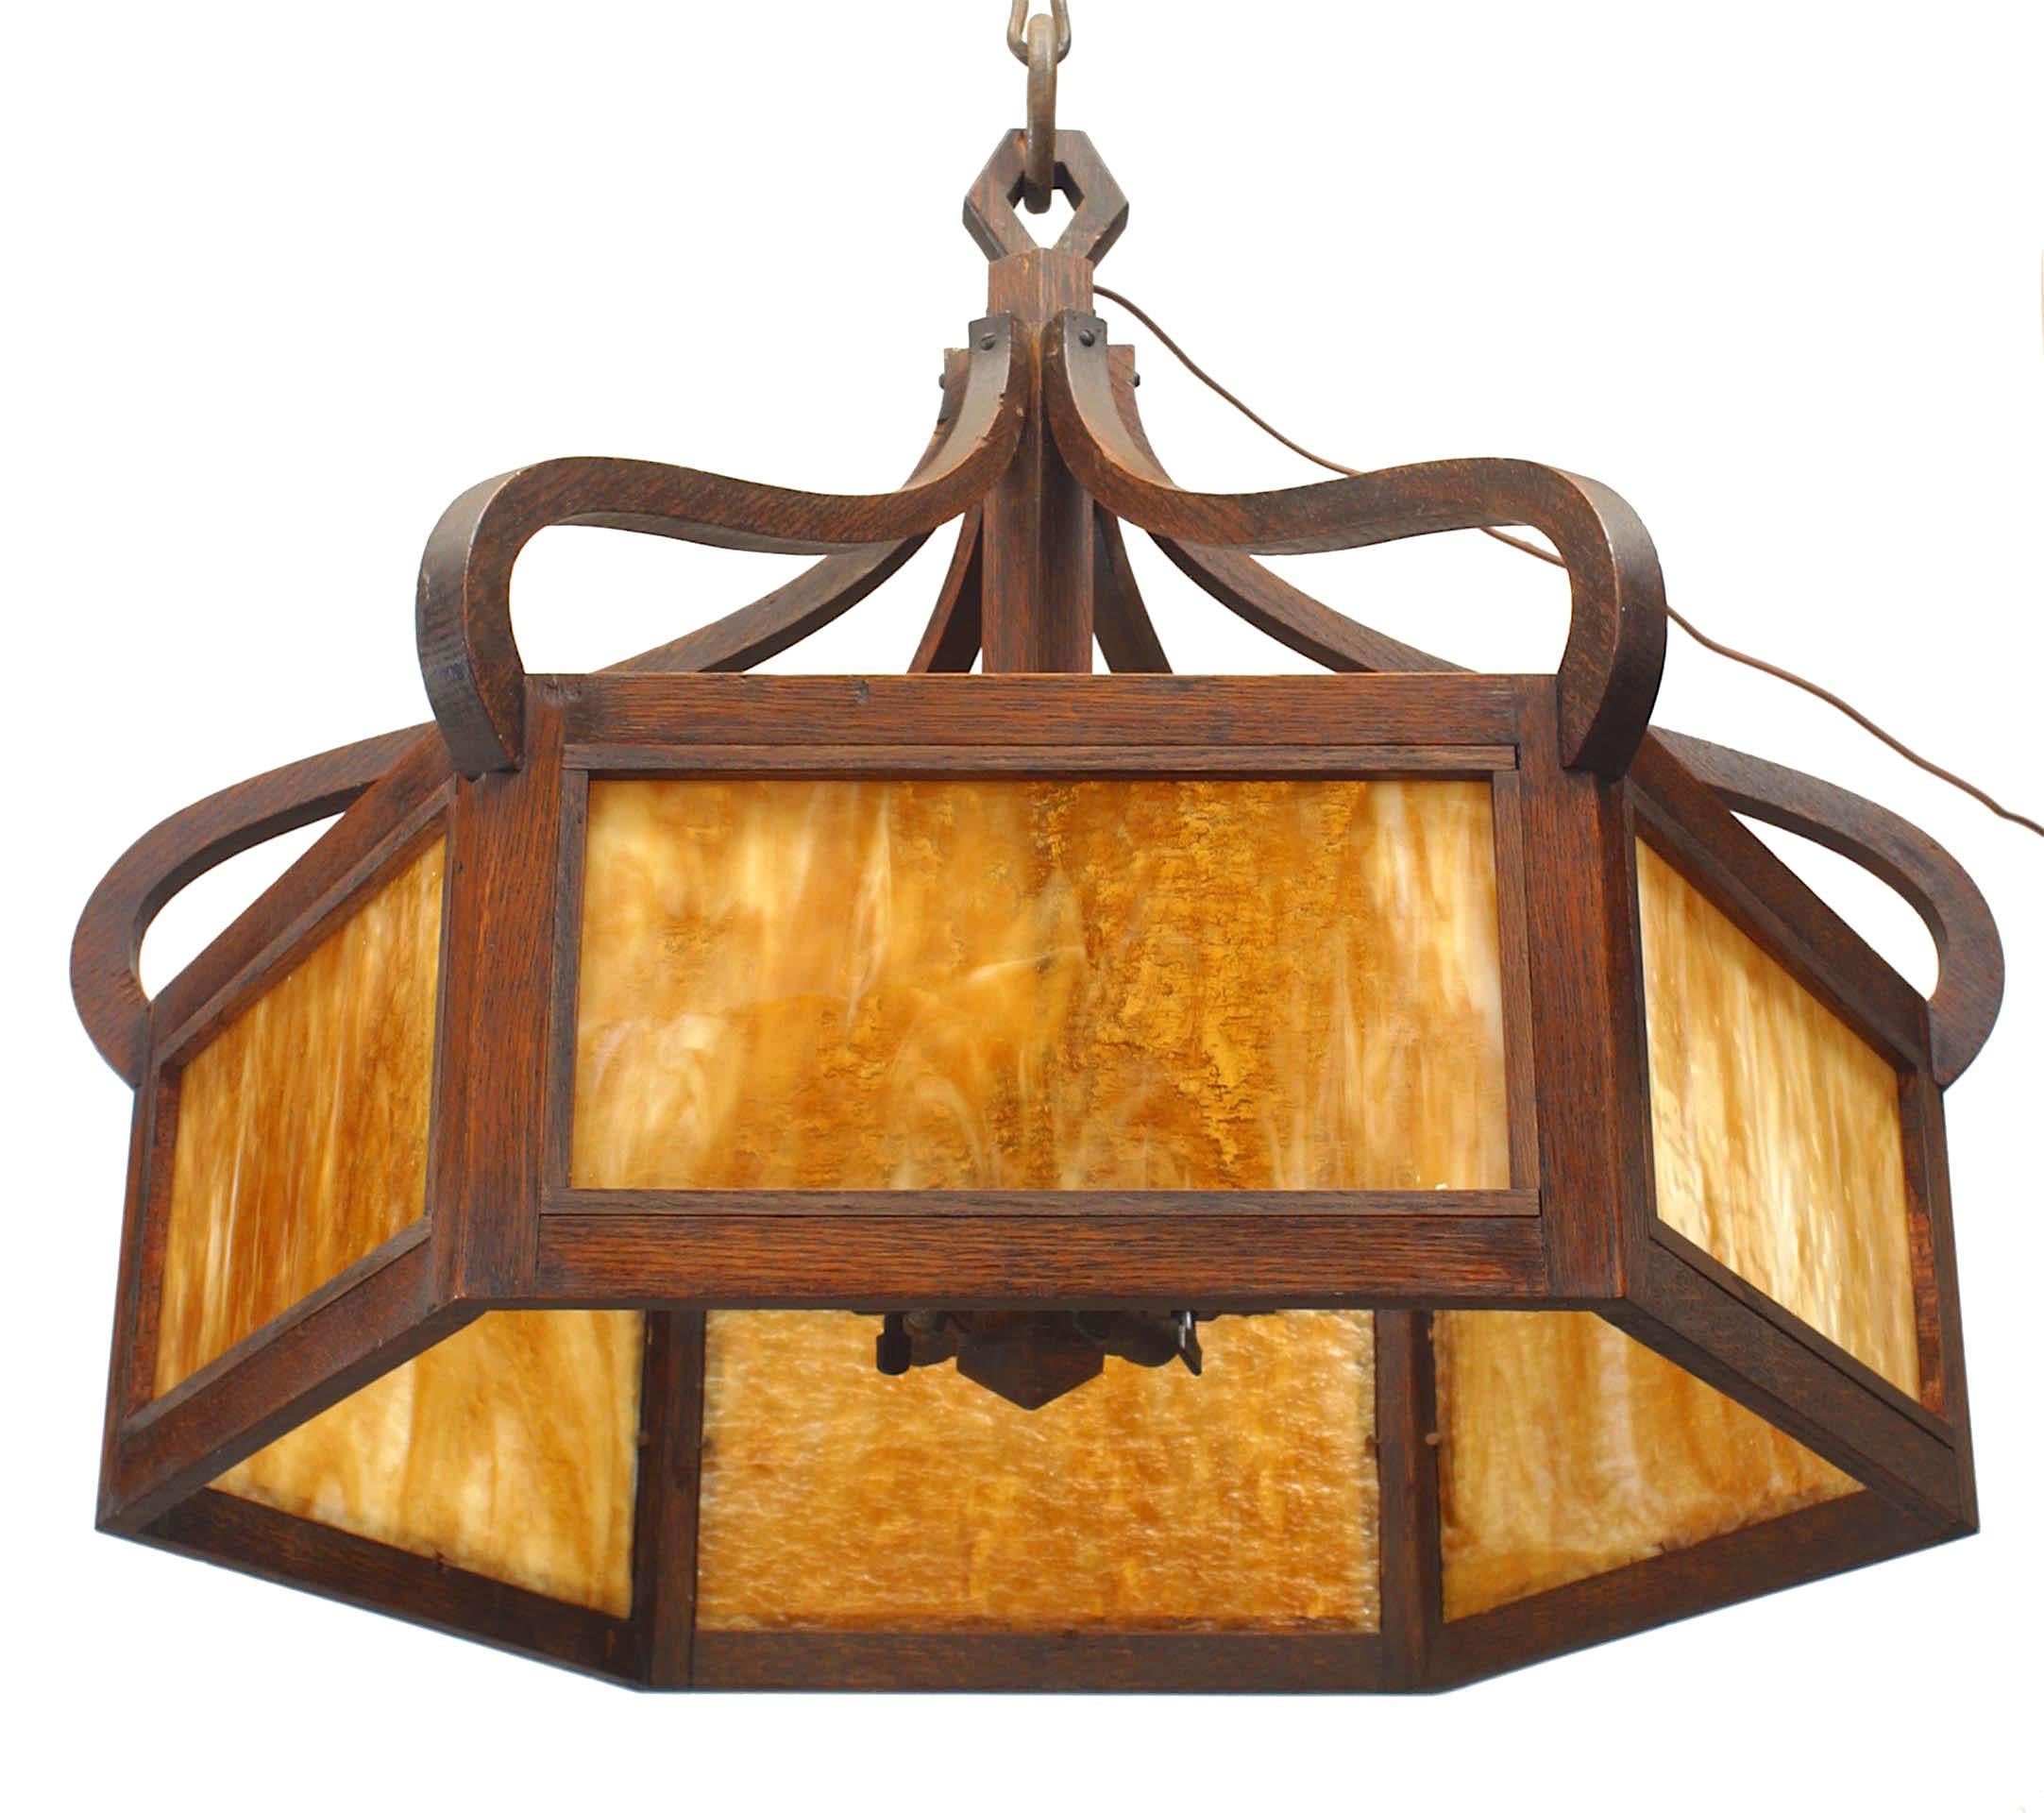 American Mission 6 sided chandelier with stained oak framed caramel slag glass panels supported by a canopy with curved design supports.
